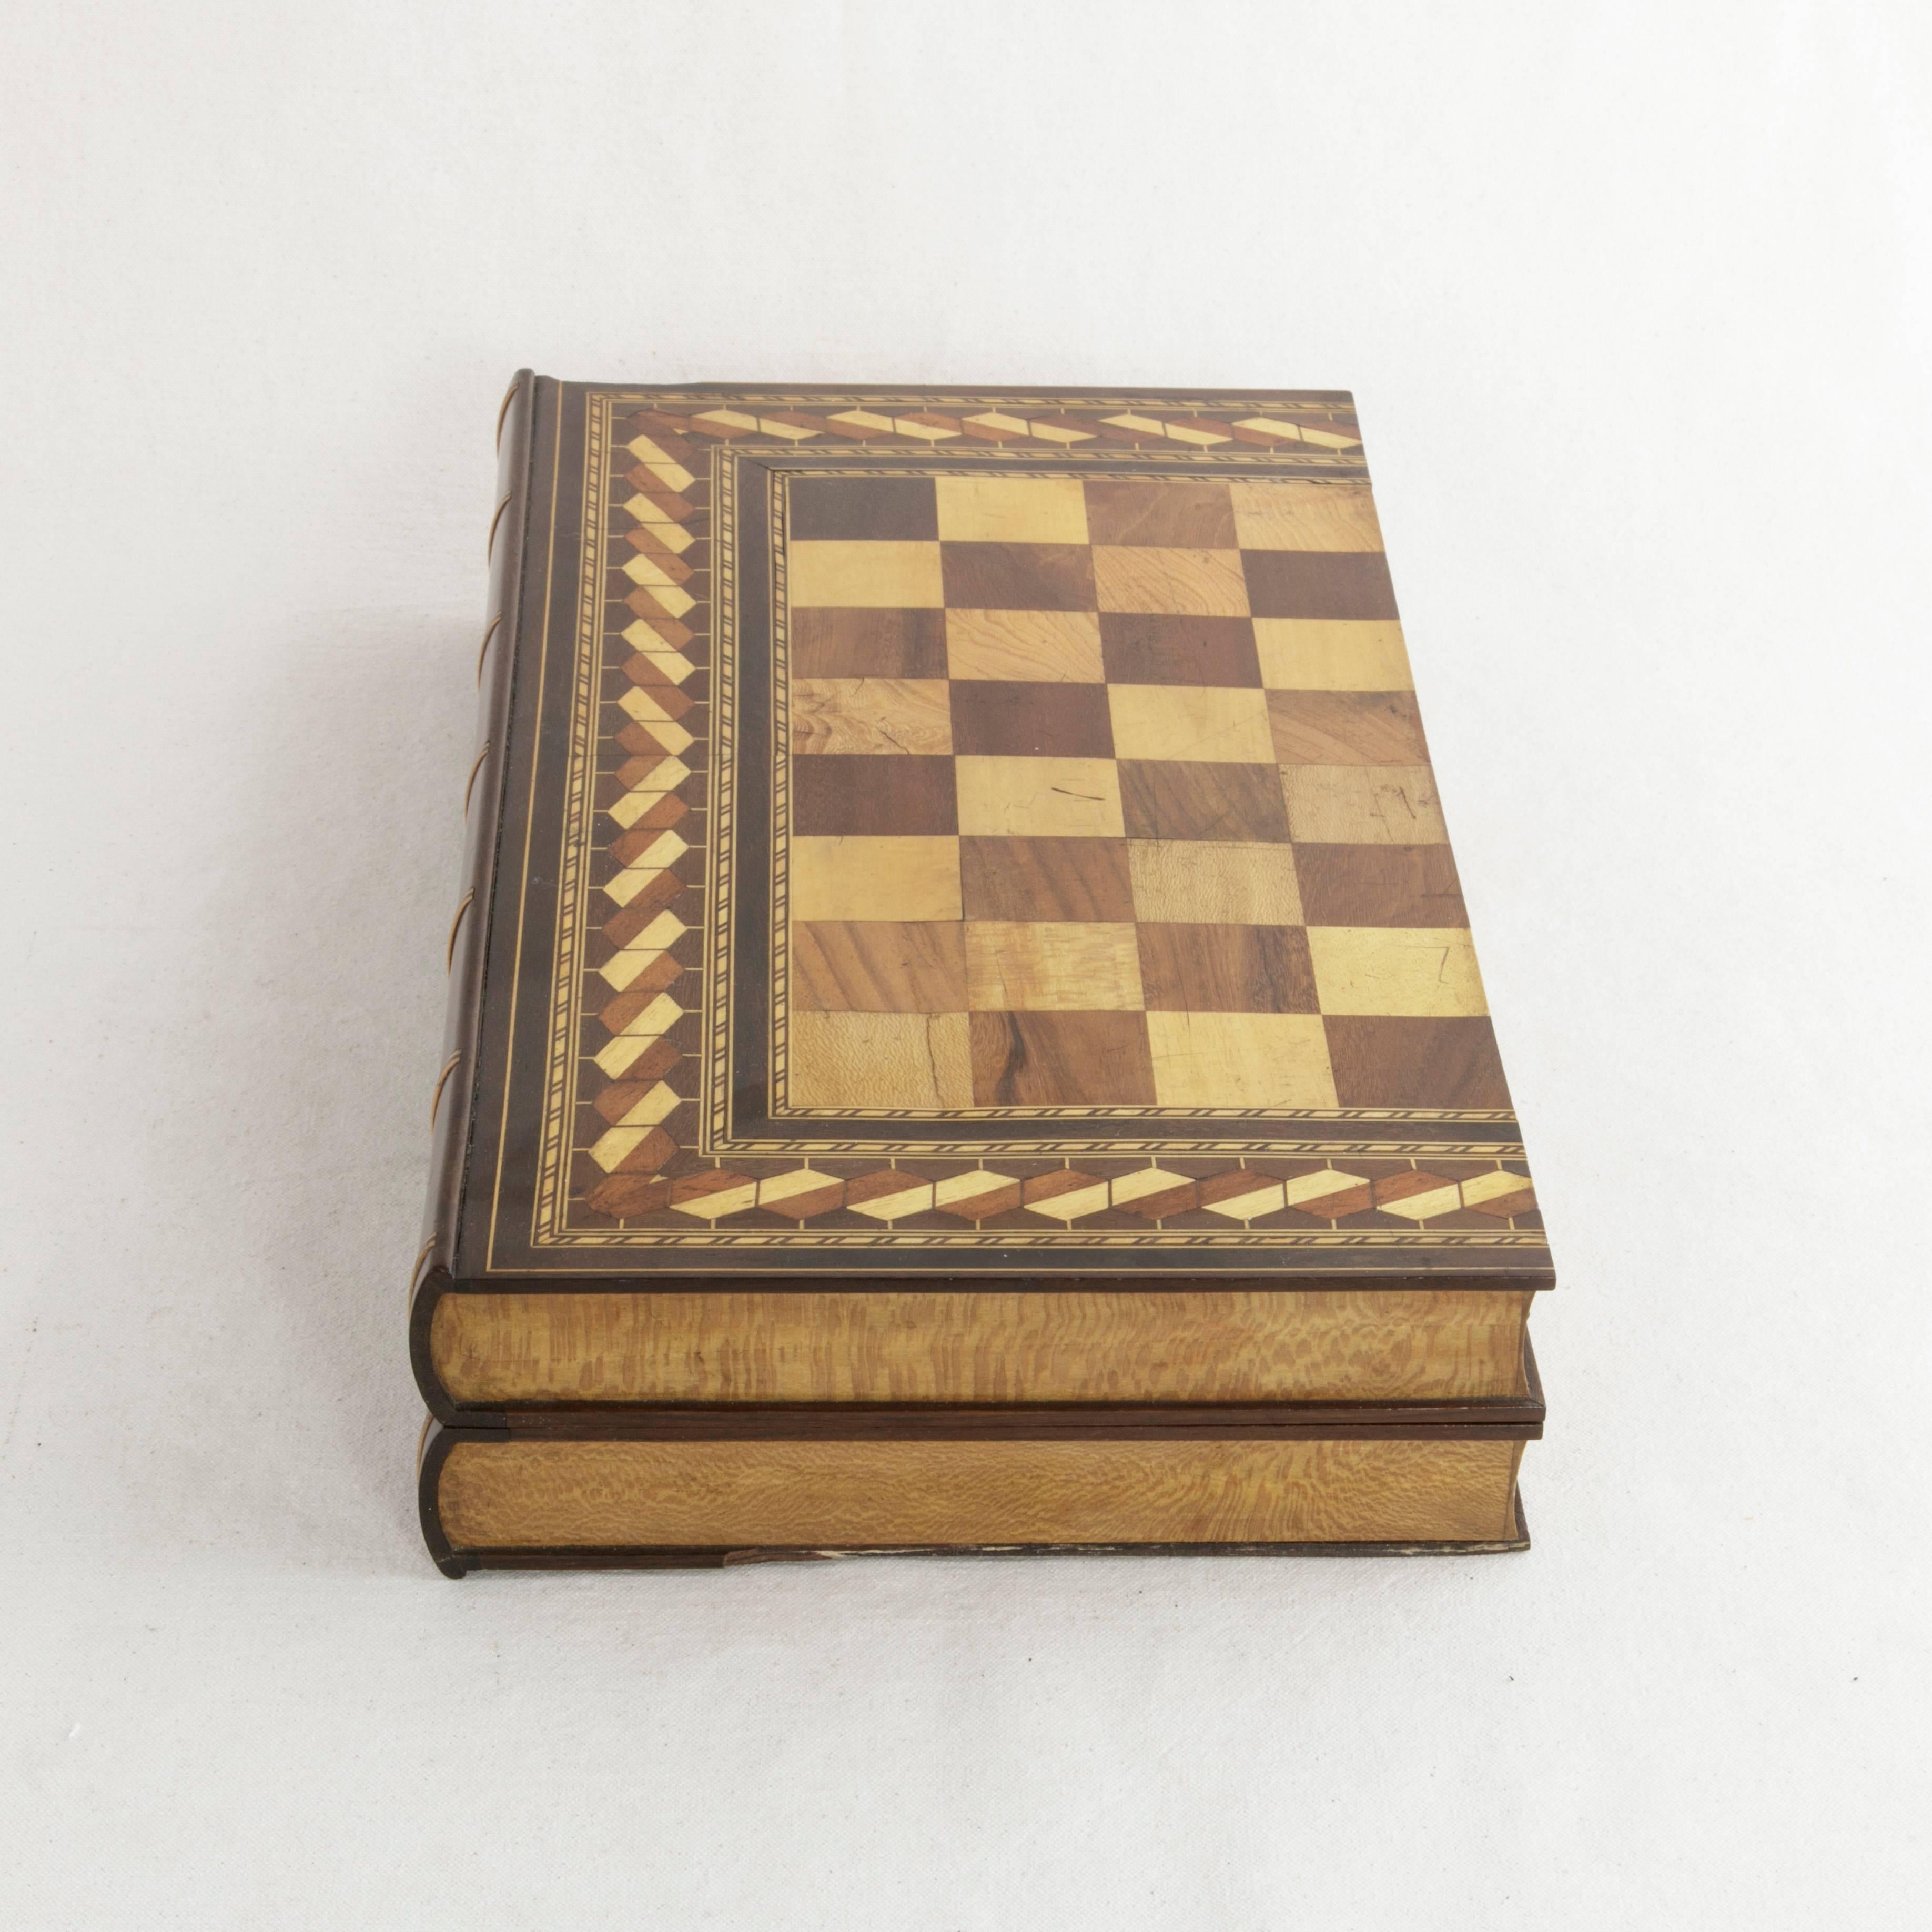 Fruitwood Hinged Marquetry Game Box for Chess, Checkers, Backgammon, Stacked Books Form